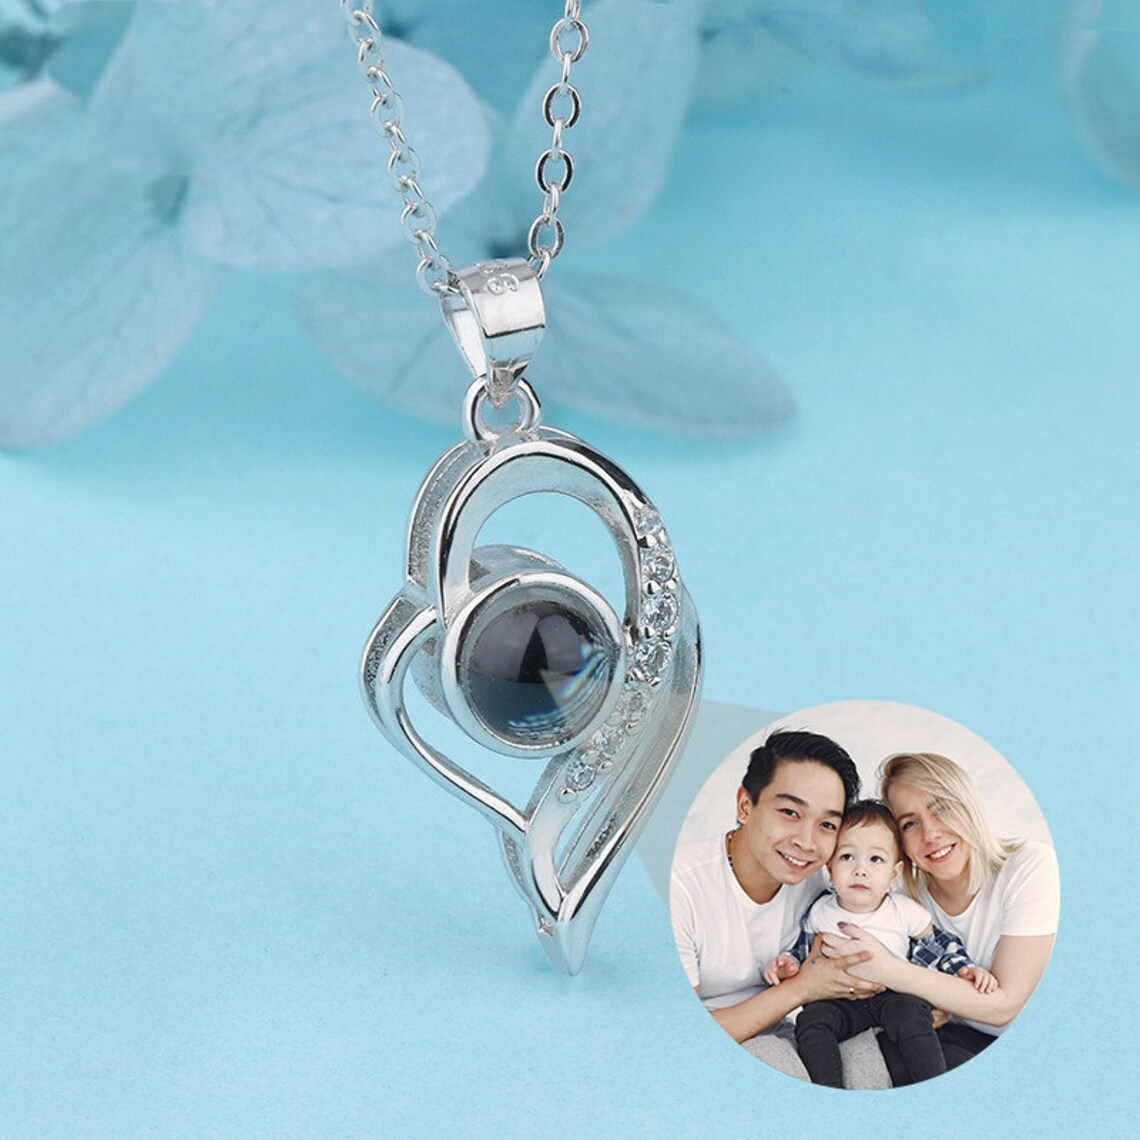 Love Heart Necklace Personalized Photo Projection Necklace